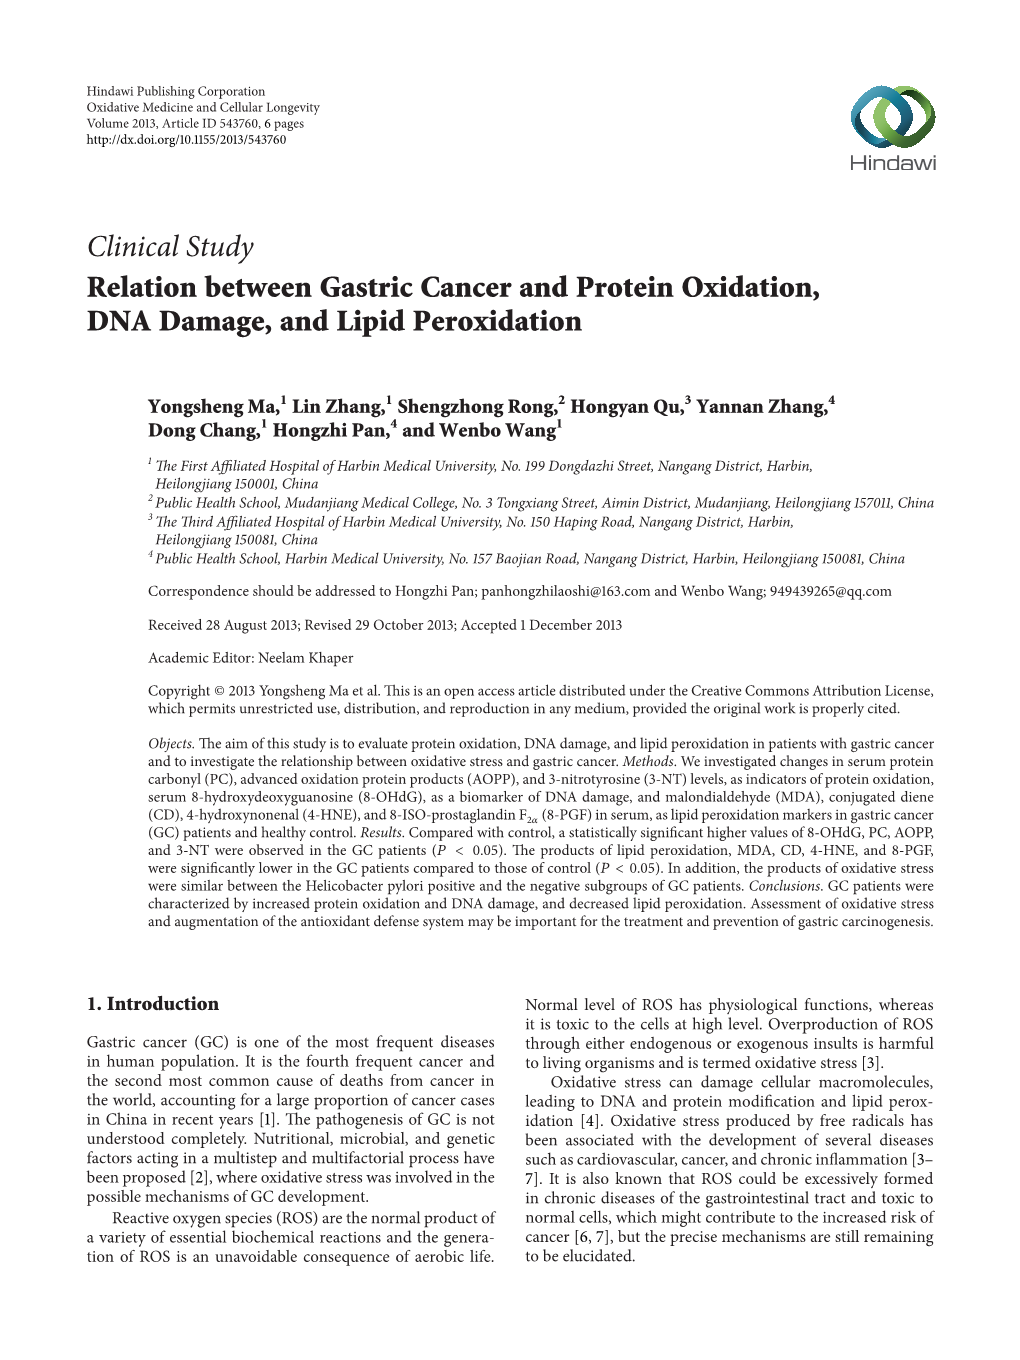 Clinical Study Relation Between Gastric Cancer and Protein Oxidation, DNA Damage, and Lipid Peroxidation